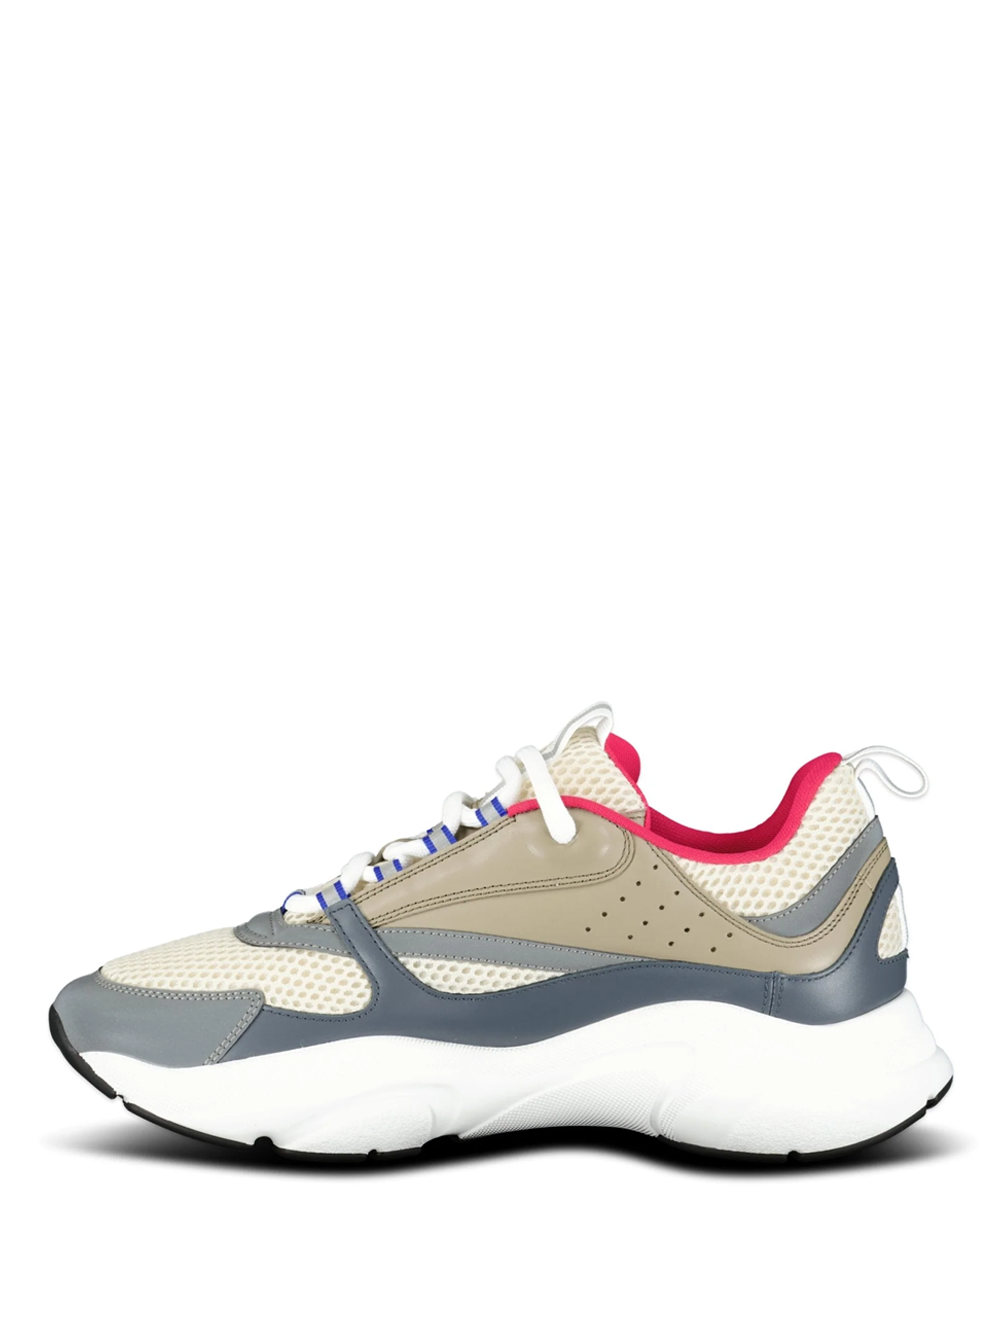 Dior B22 Technical Mesh Trainers in Light Brown